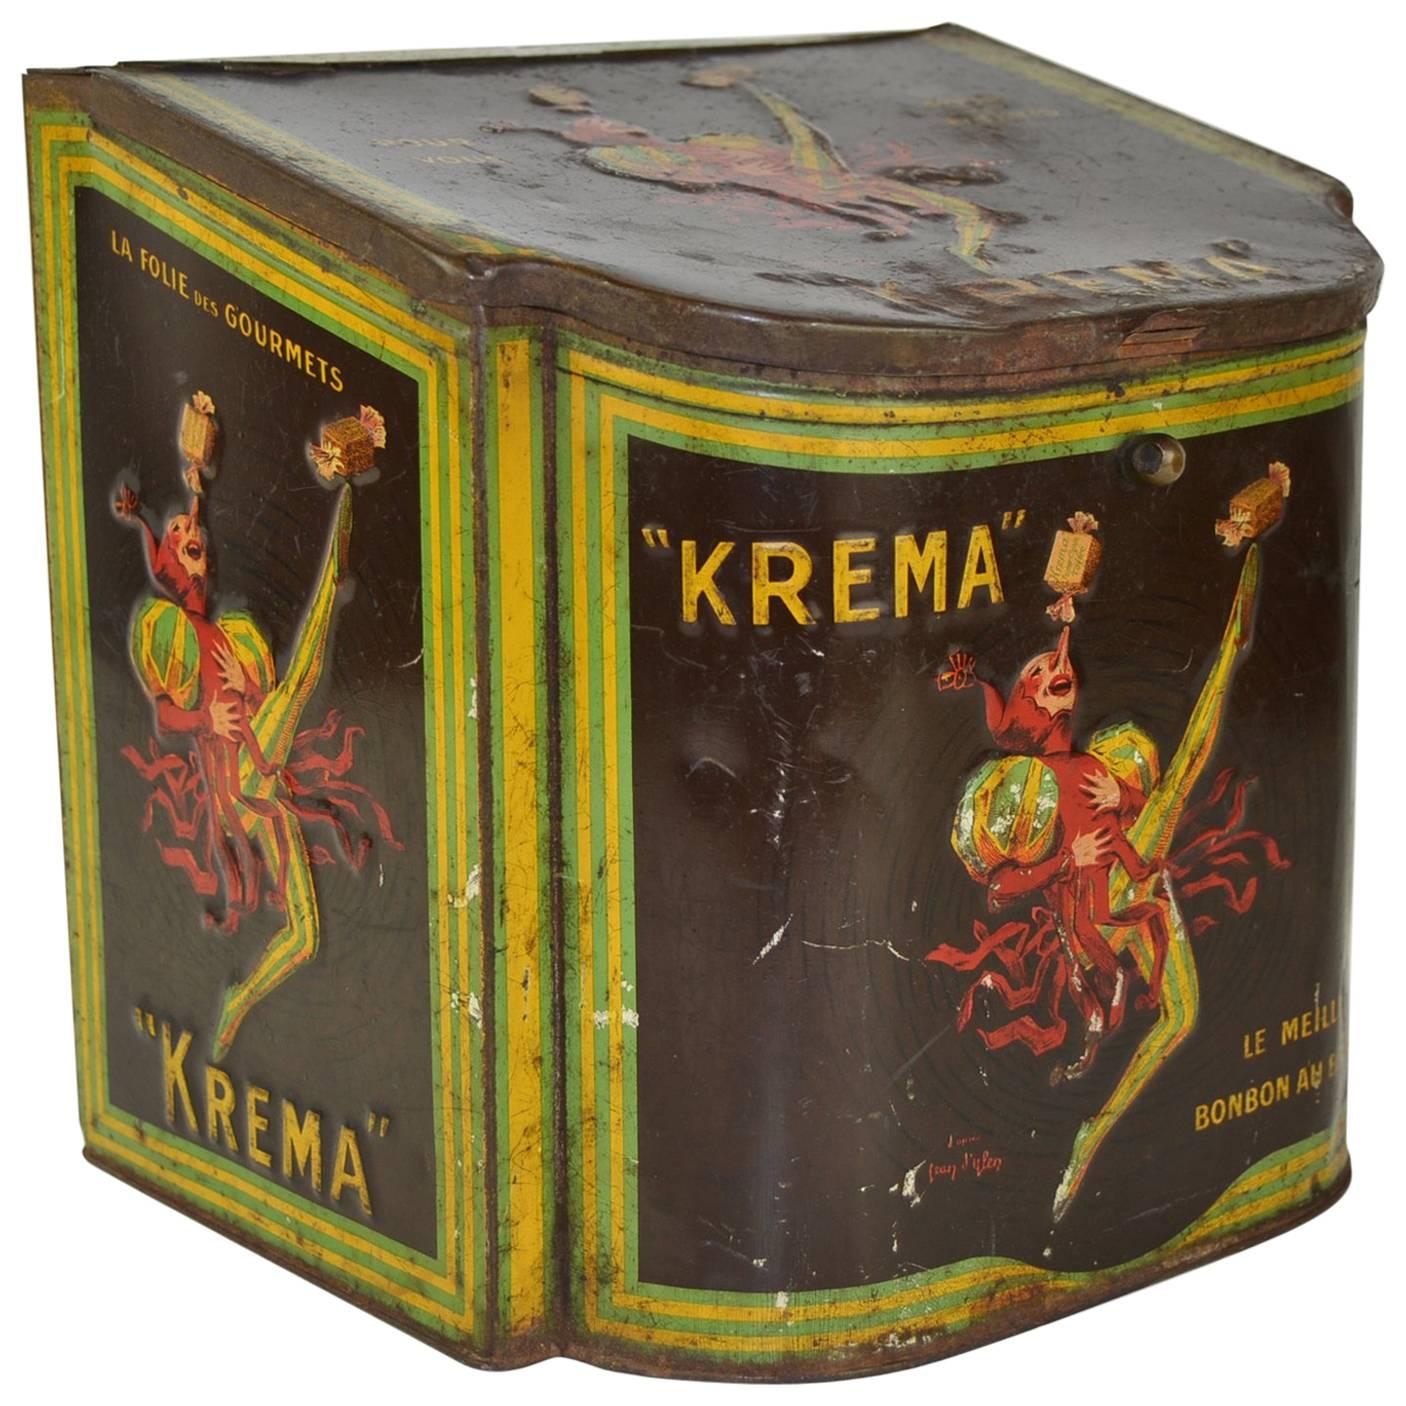 Jean D' Ylen designed and signed Confectionery Tin with Jester for Krema Bonbons